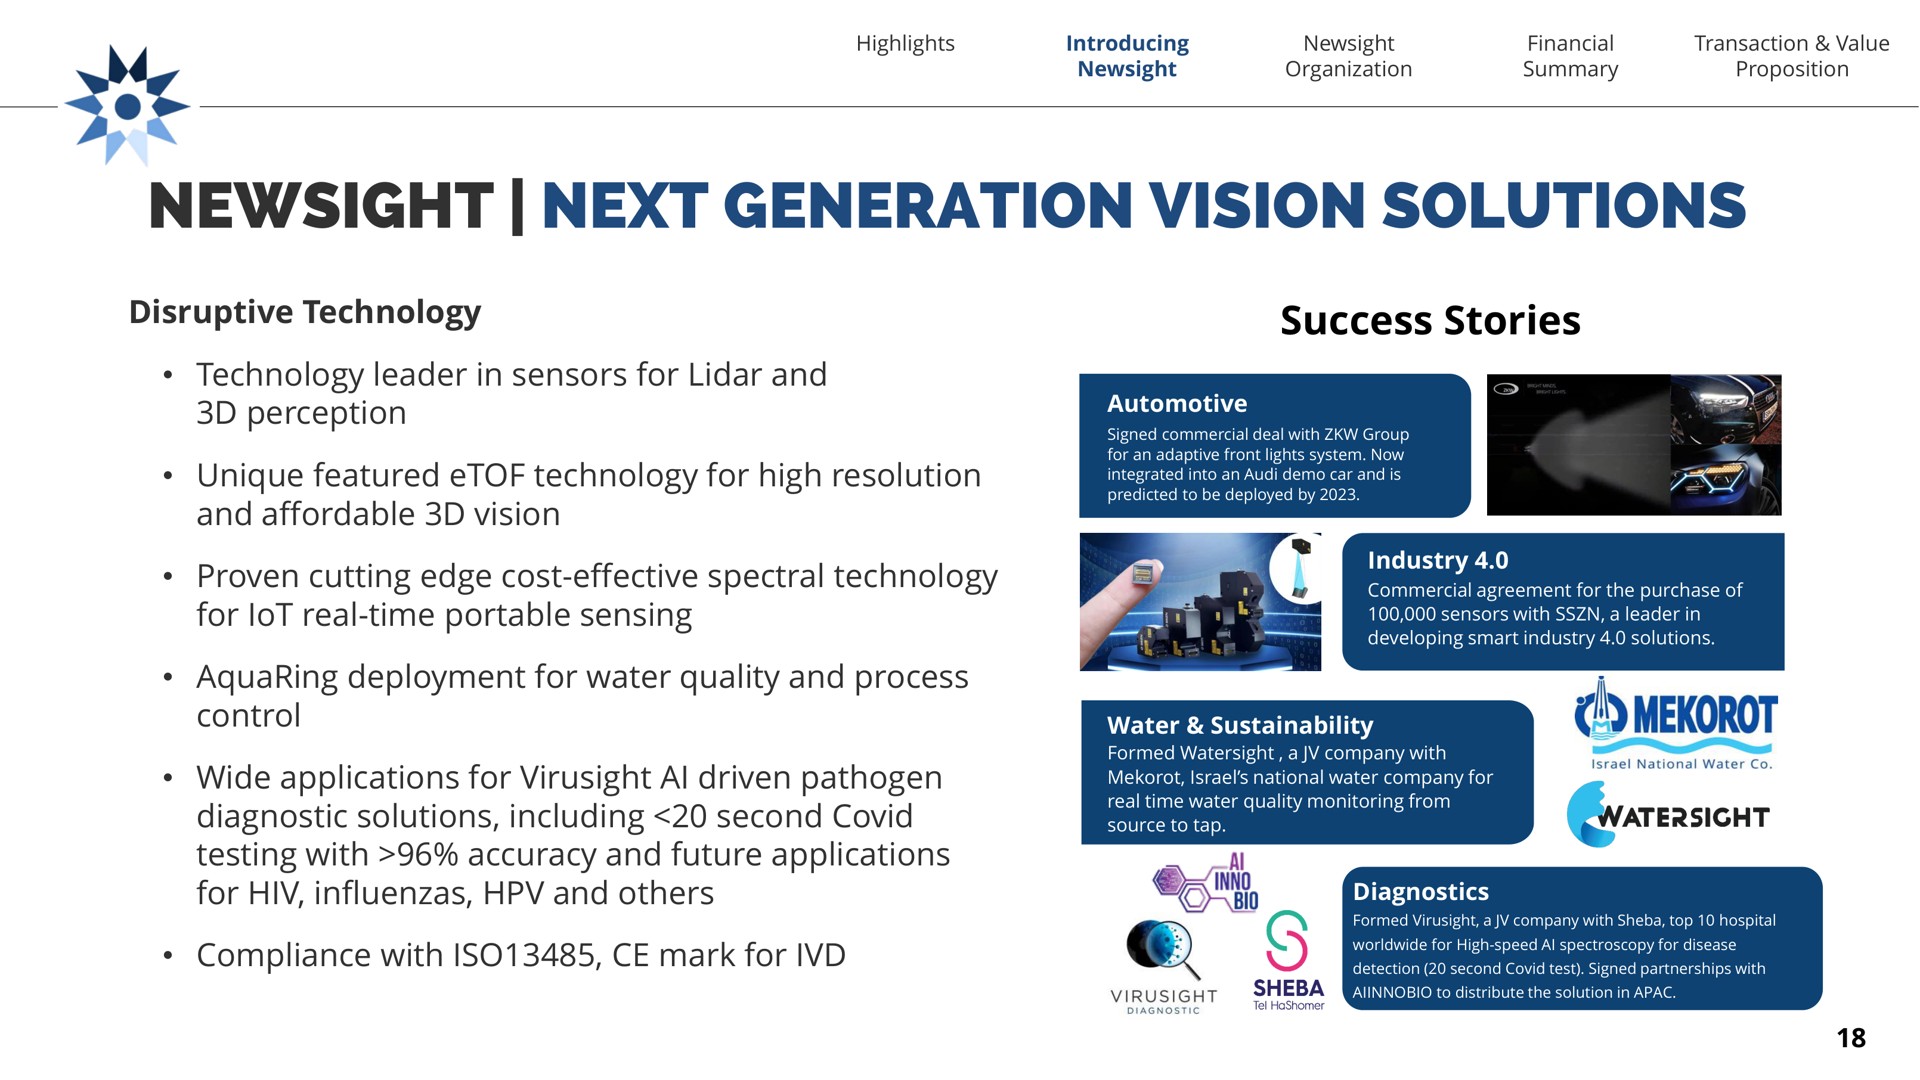 next generation vision solutions disruptive technology technology leader in sensors for and perception unique featured technology for high resolution and affordable vision proven cutting edge cost effective spectral technology for real time portable sensing deployment for water quality and process control wide applications for driven pathogen diagnostic solutions including second covid testing with accuracy and future applications for influenzas and compliance with iso mark for success stories automotive industry water diagnostics lot is | Newsight Imaging